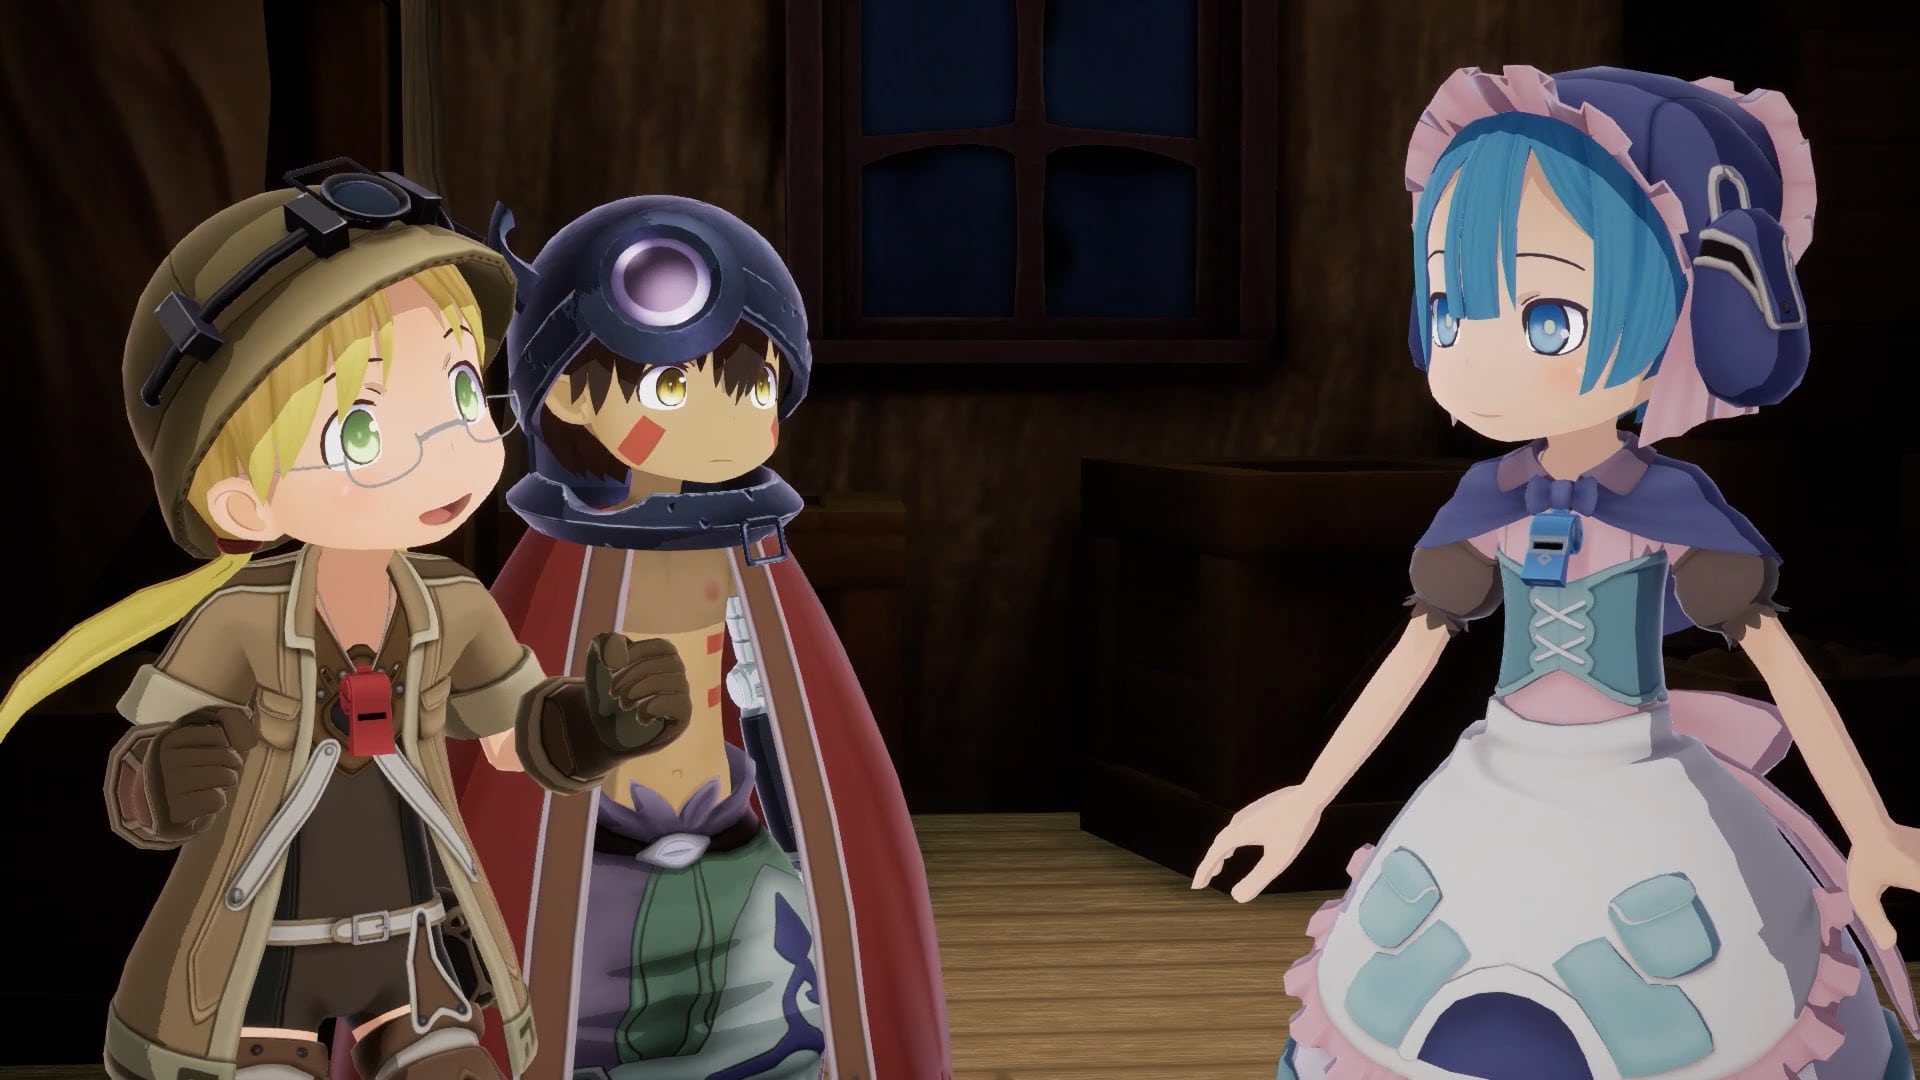 Made in Abyss: Binary Star Falling into Darkness Introduces Two